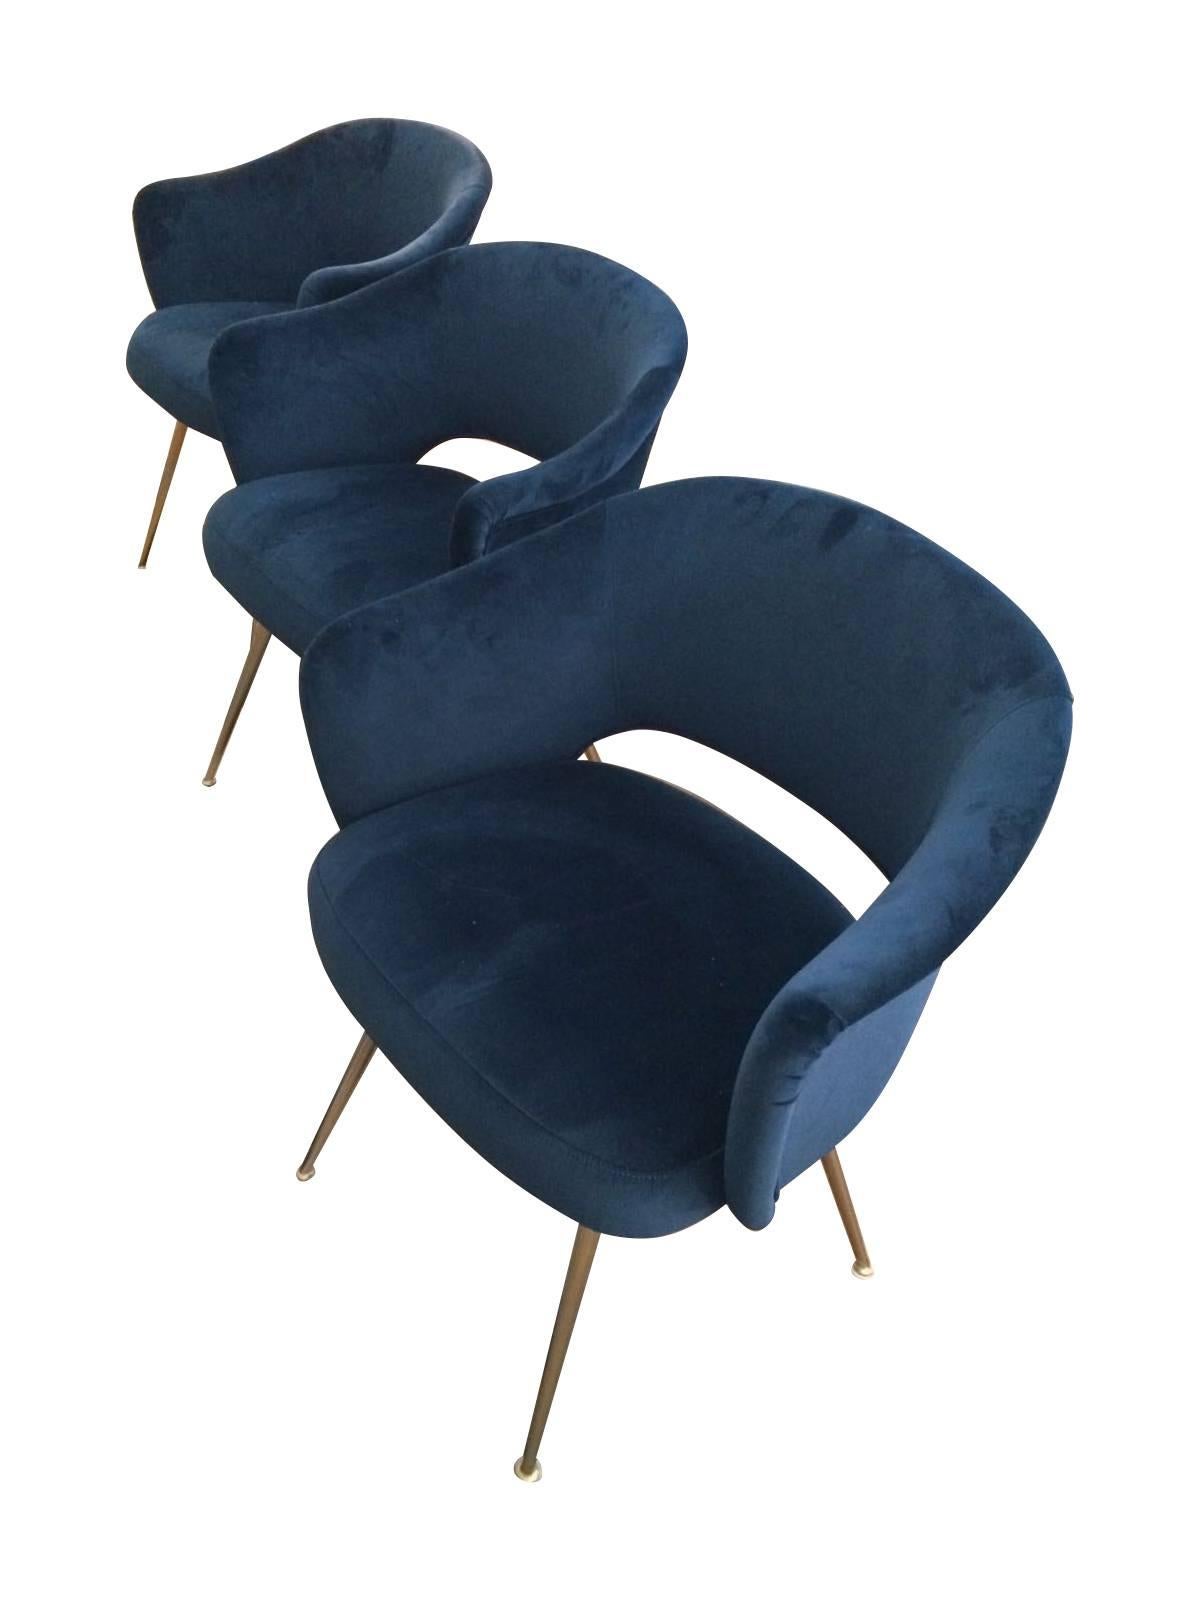 A set of four Italian chairs with arms, with gilt metal legs reupholstered in blue velvet. These chairs can be used as office or dining chairs and are extremely comfortable.